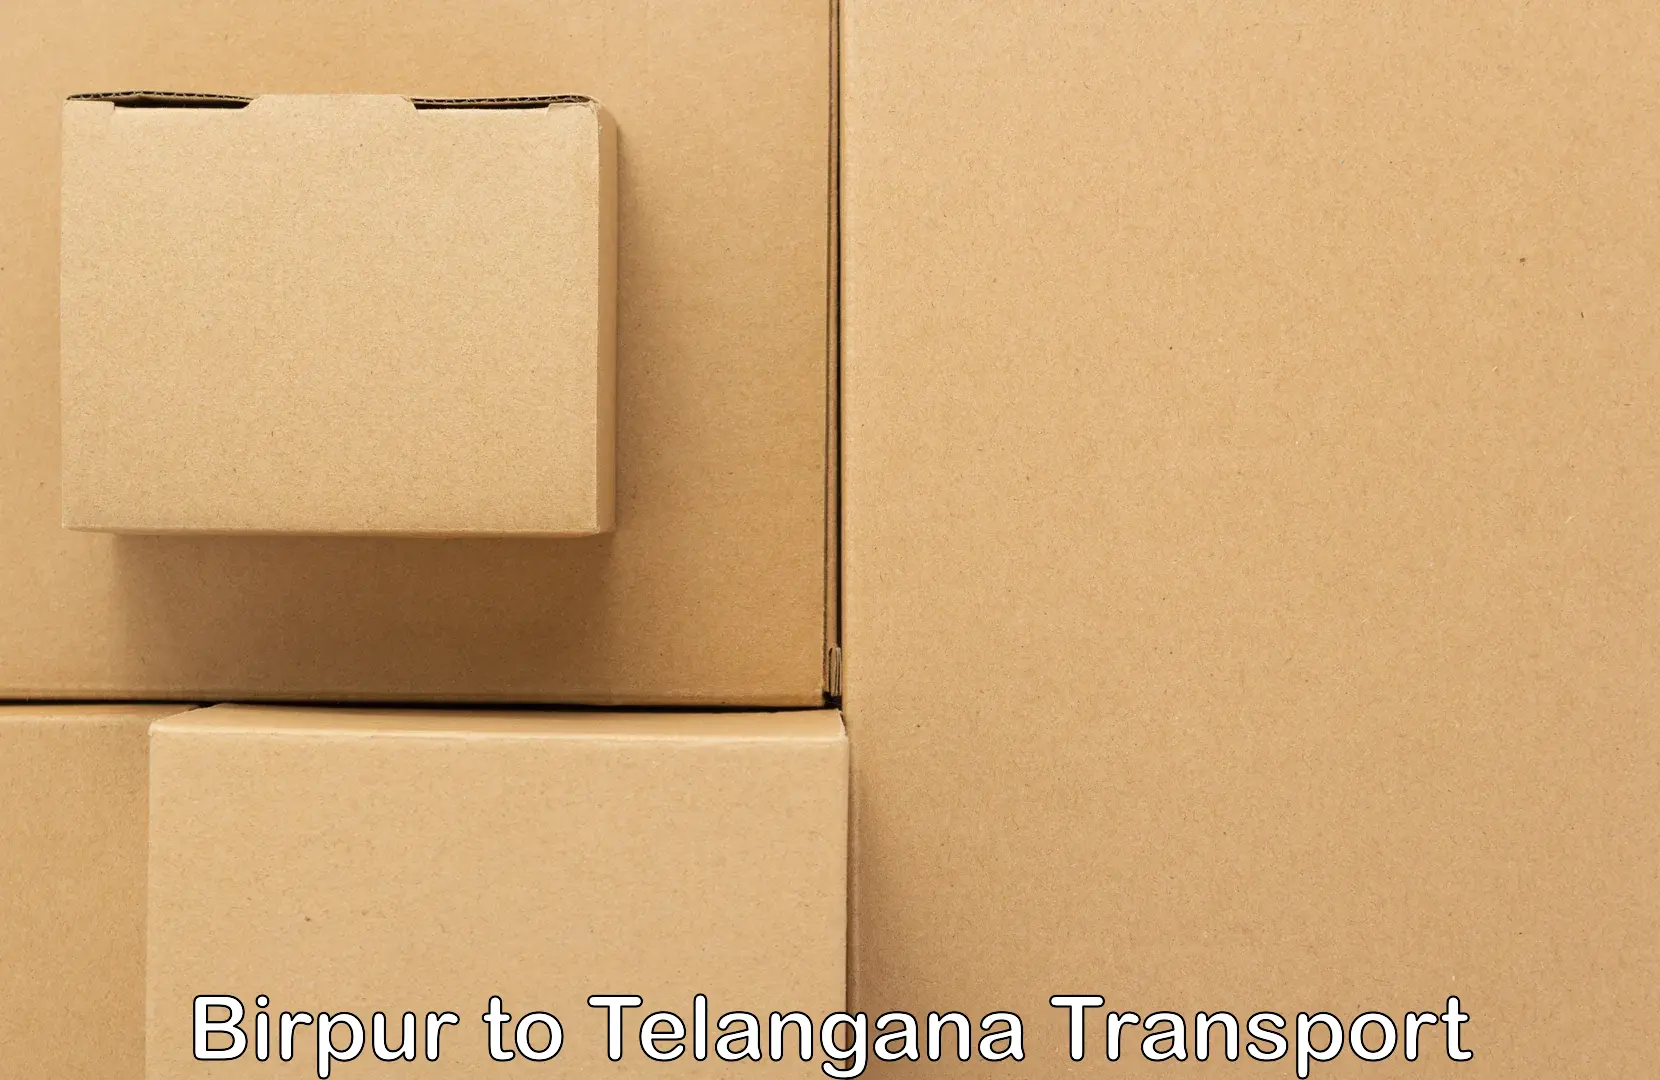 Air freight transport services Birpur to Shankarpalle